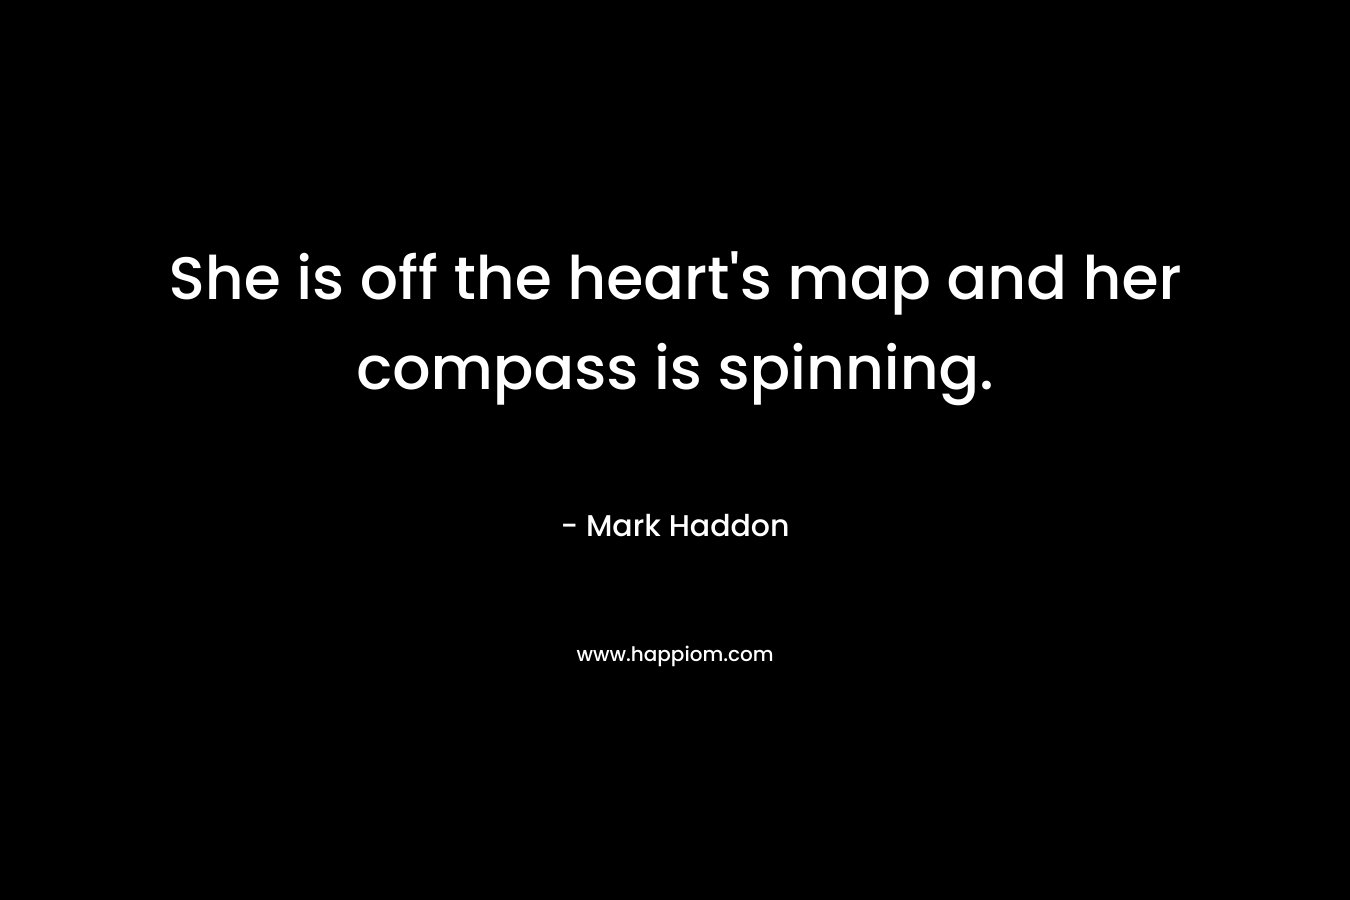 She is off the heart’s map and her compass is spinning. – Mark Haddon